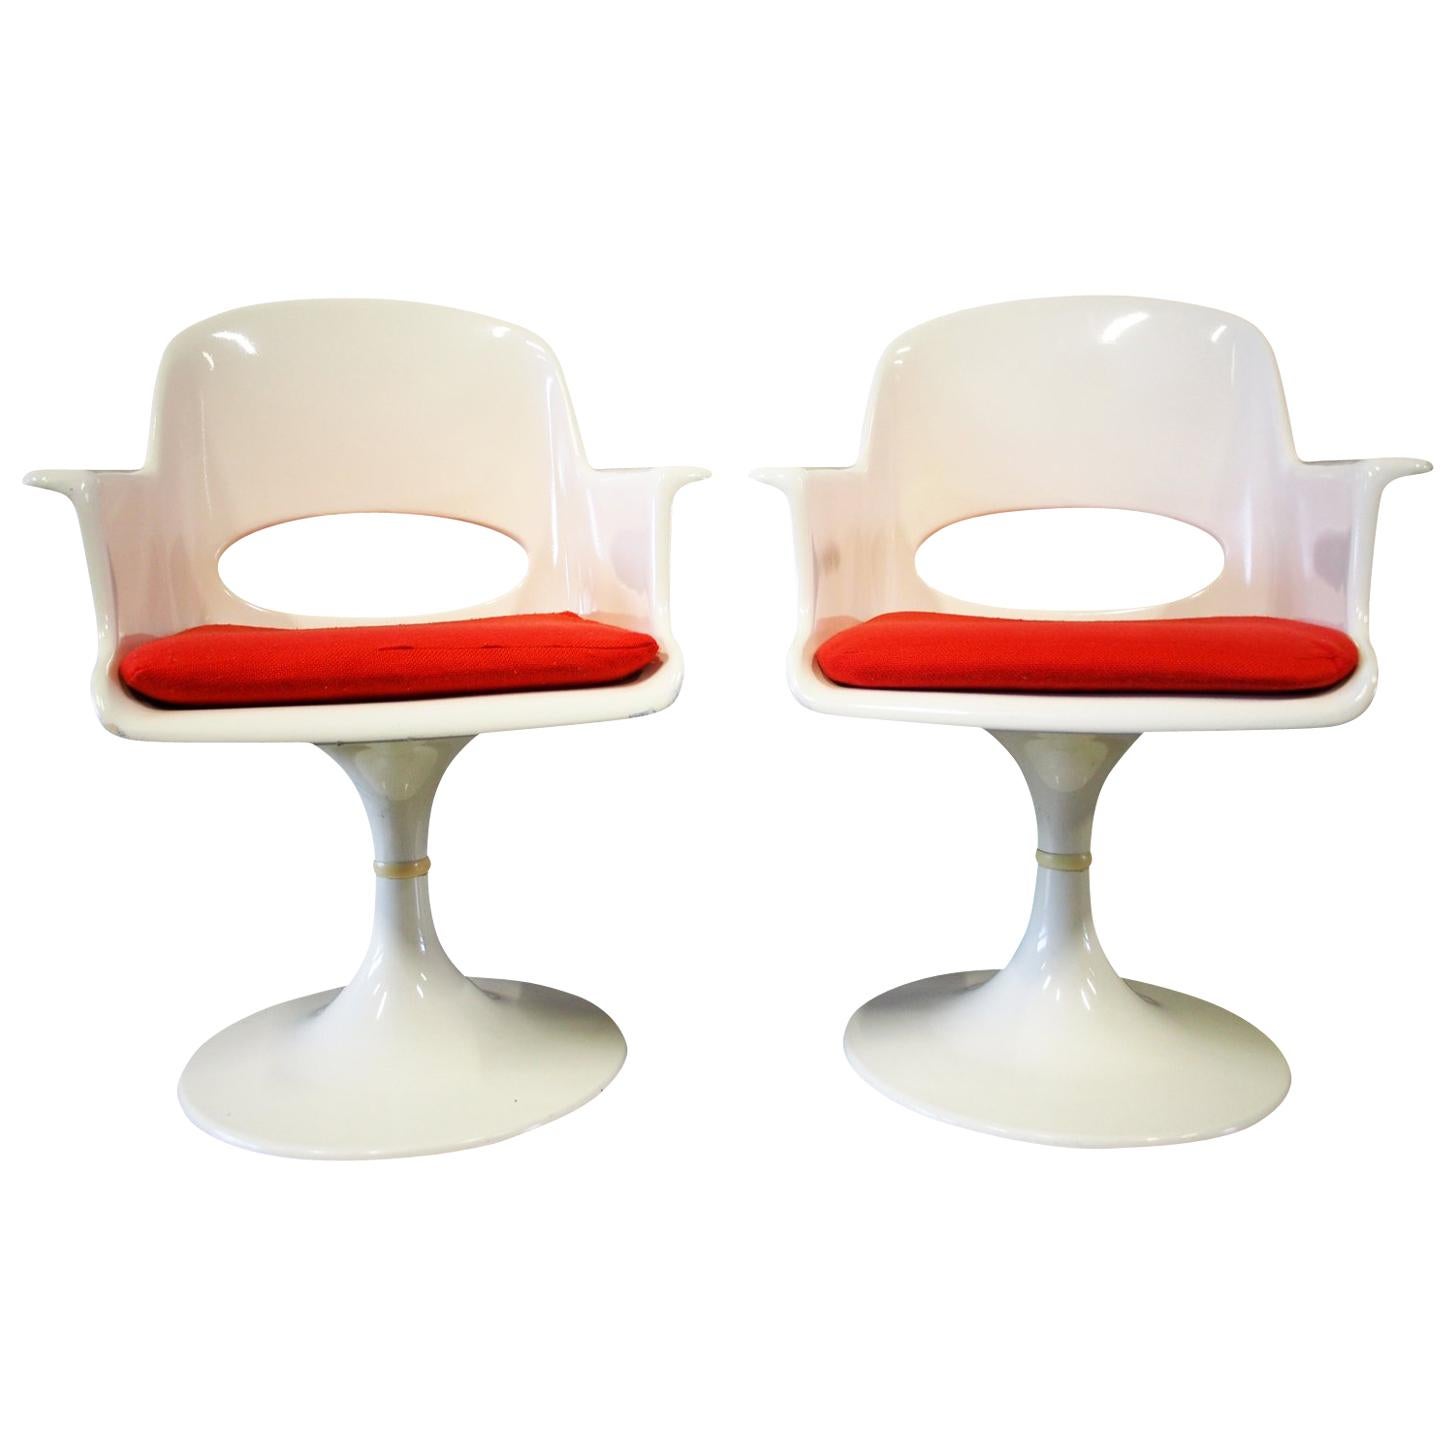 Pair of Space Age Fiberglass Armchairs in Tulip Form